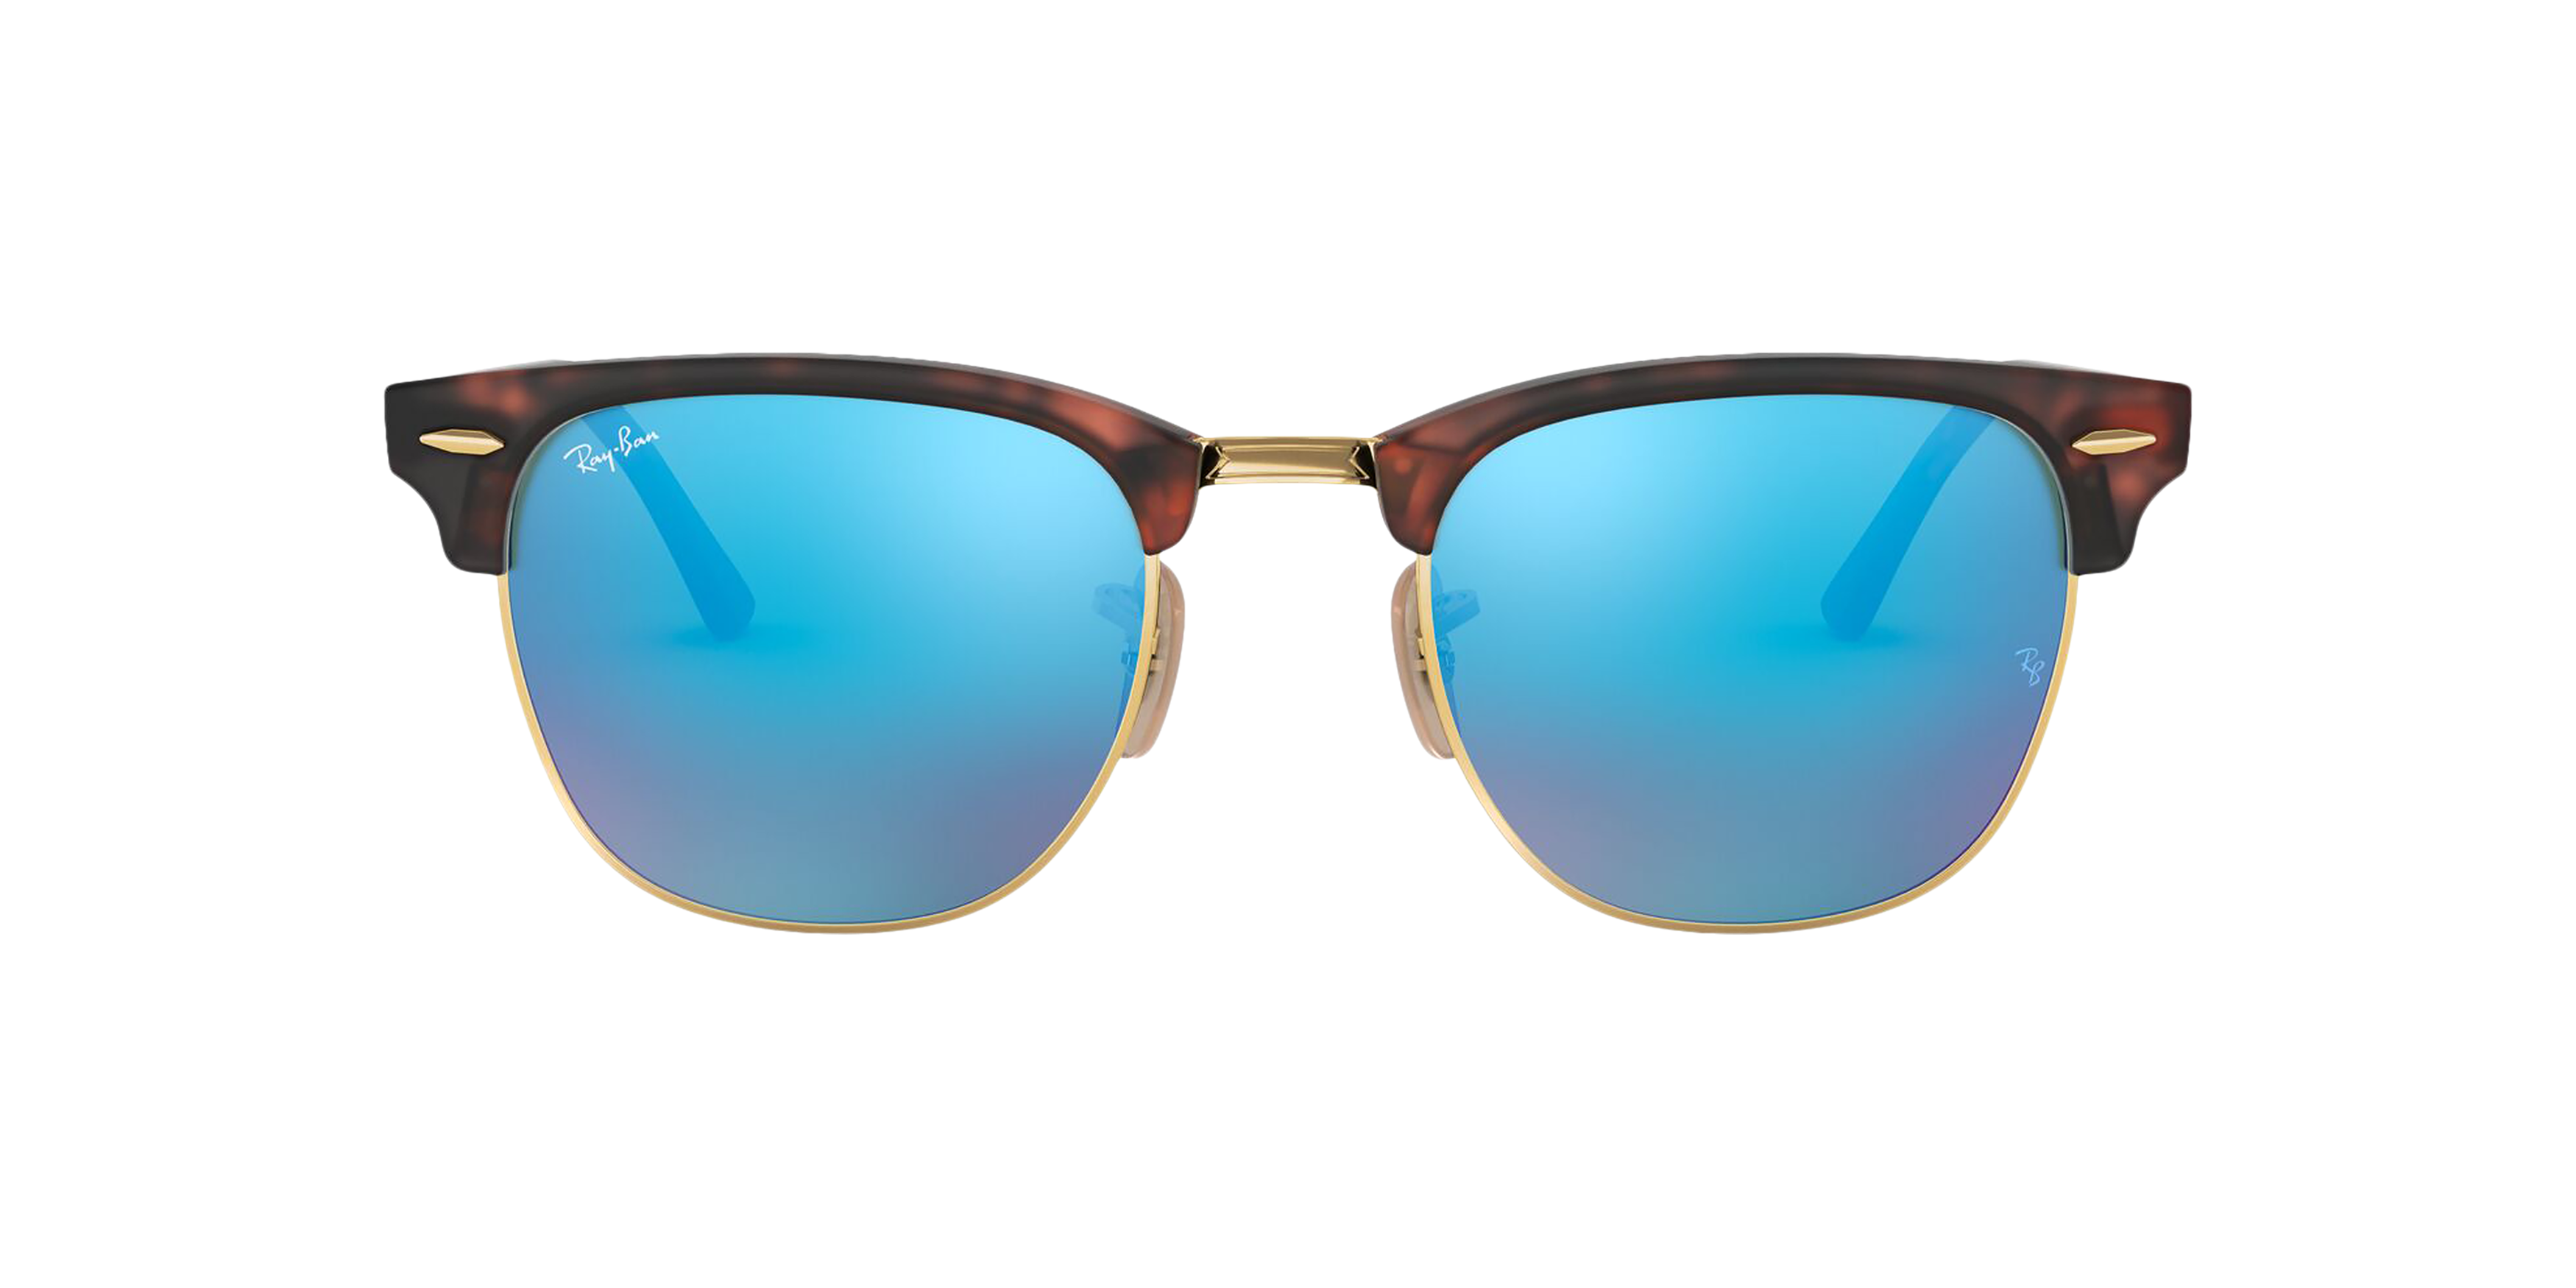 [products.image.front] Ray-Ban Clubmaster Flash RB3016 114517